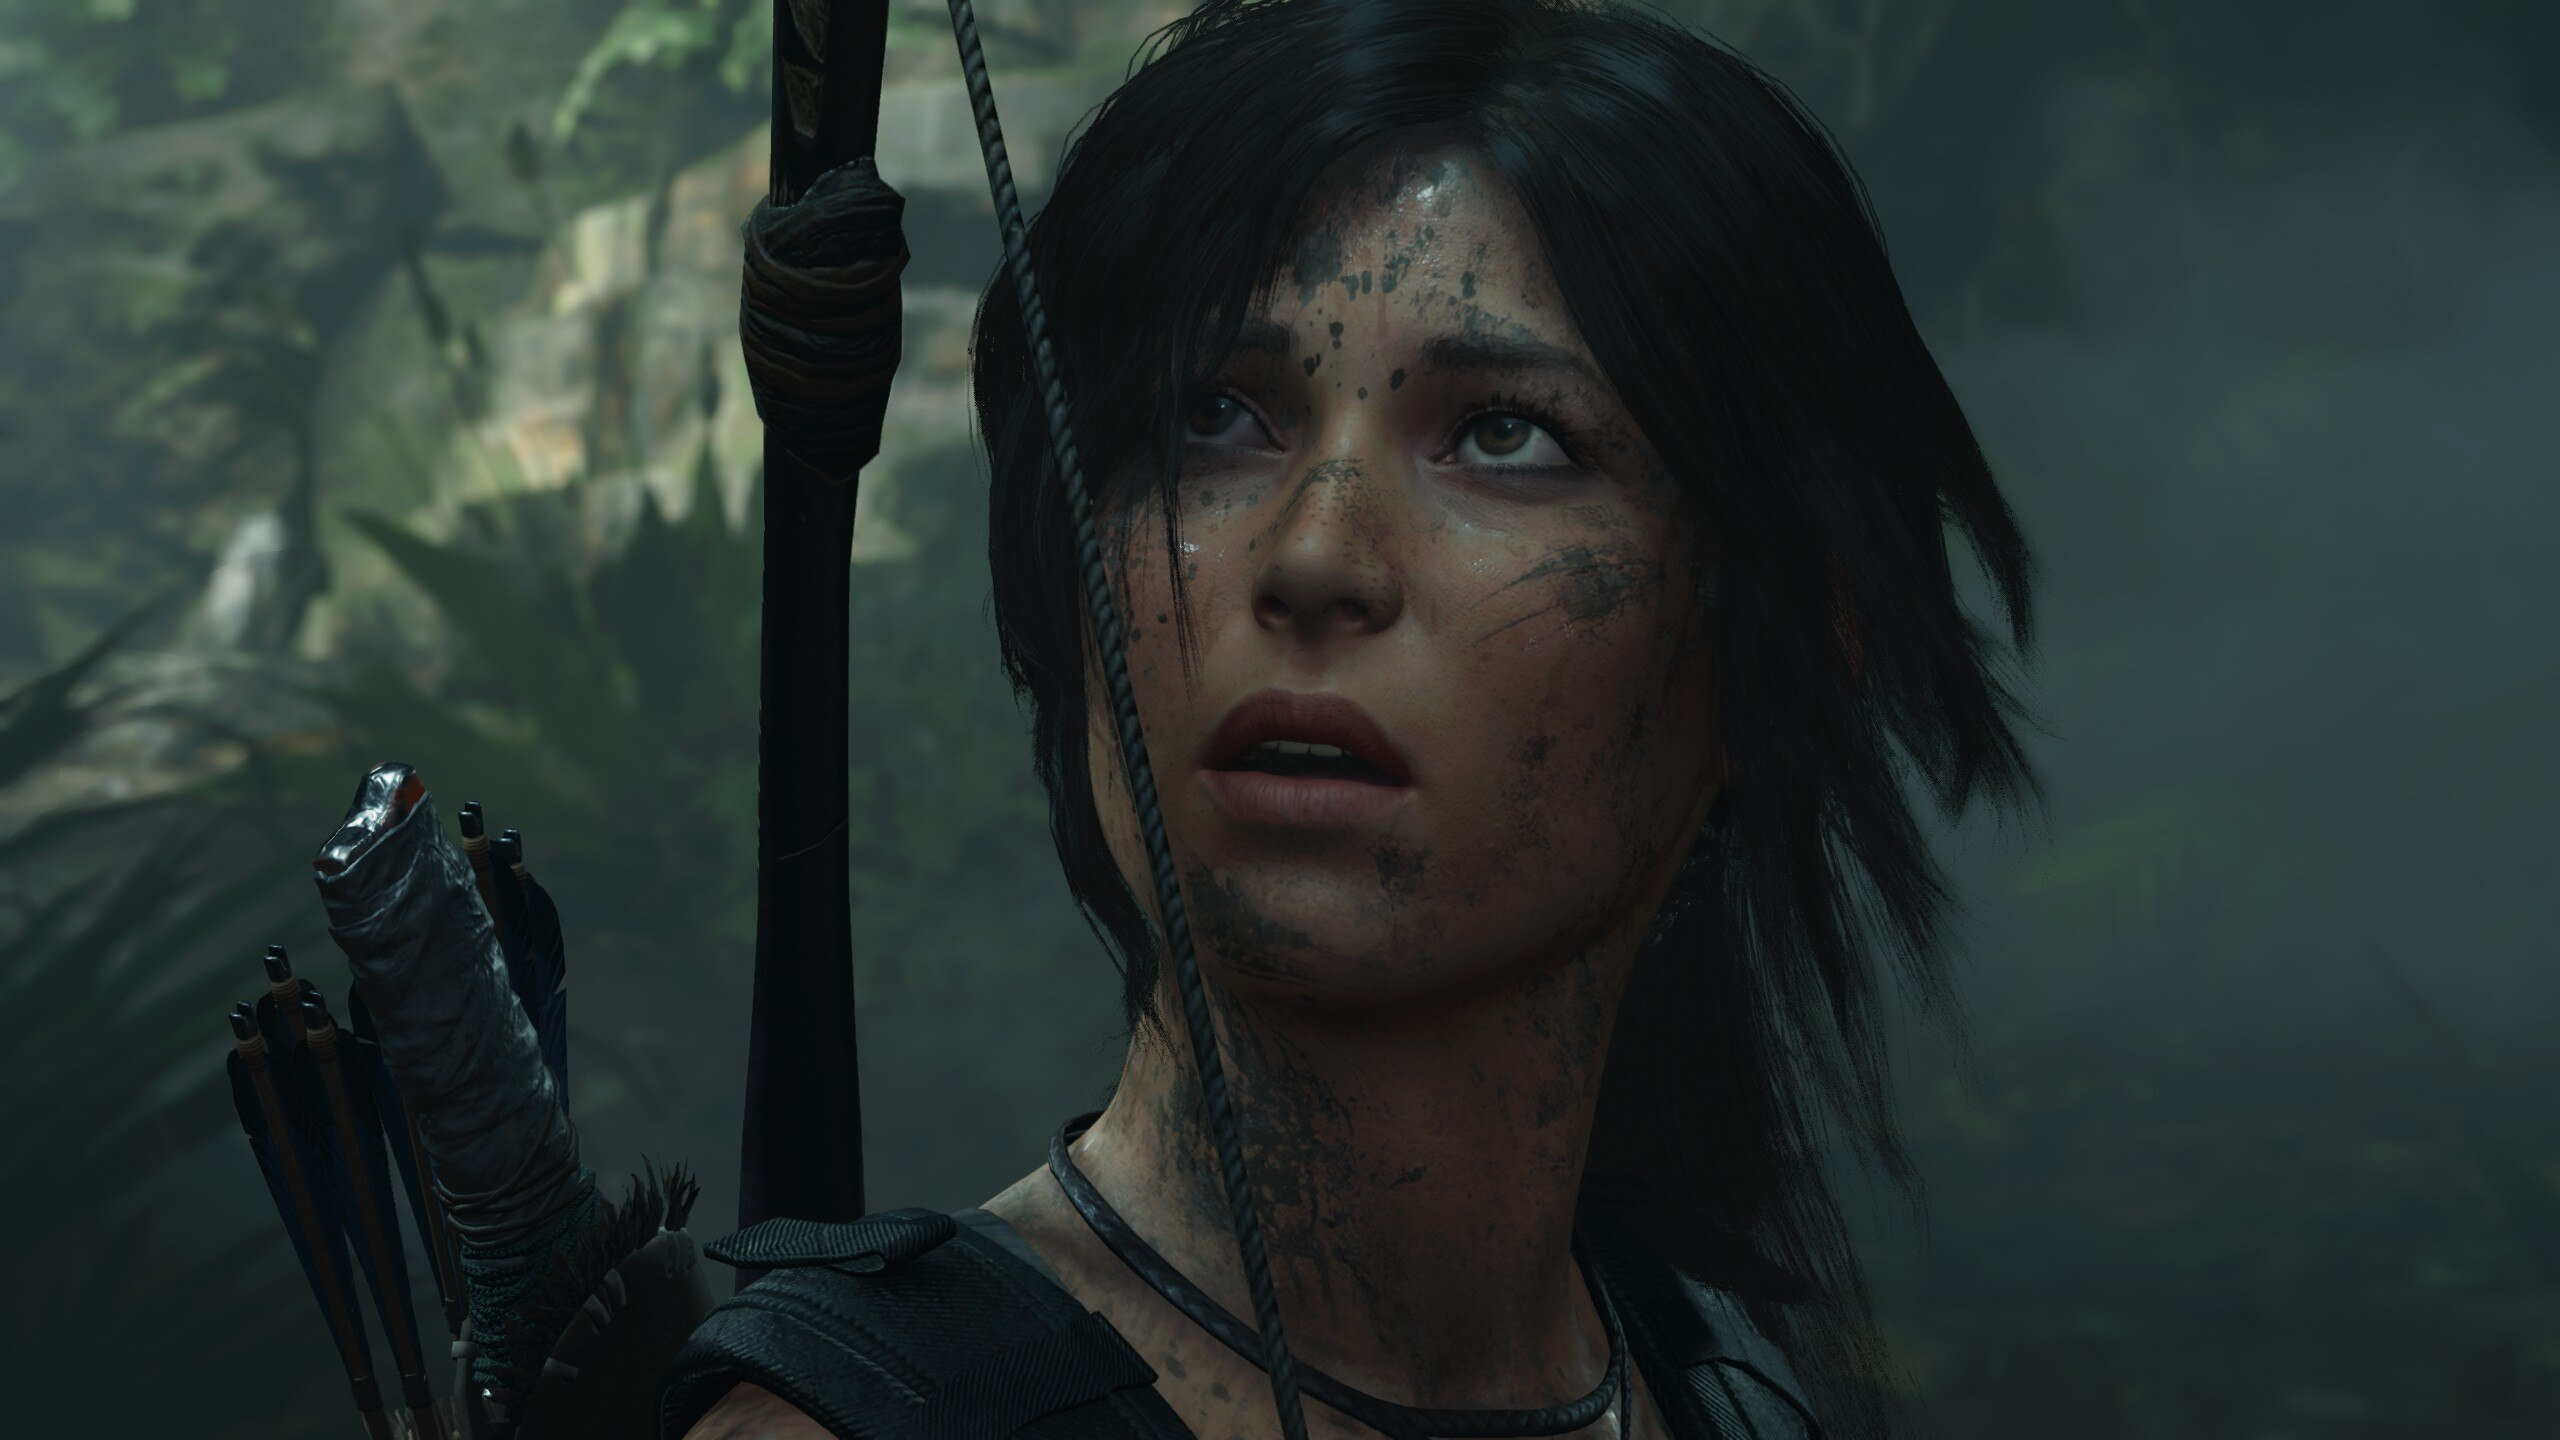 The next Tomb Raider will be released by Amazon Games new details of